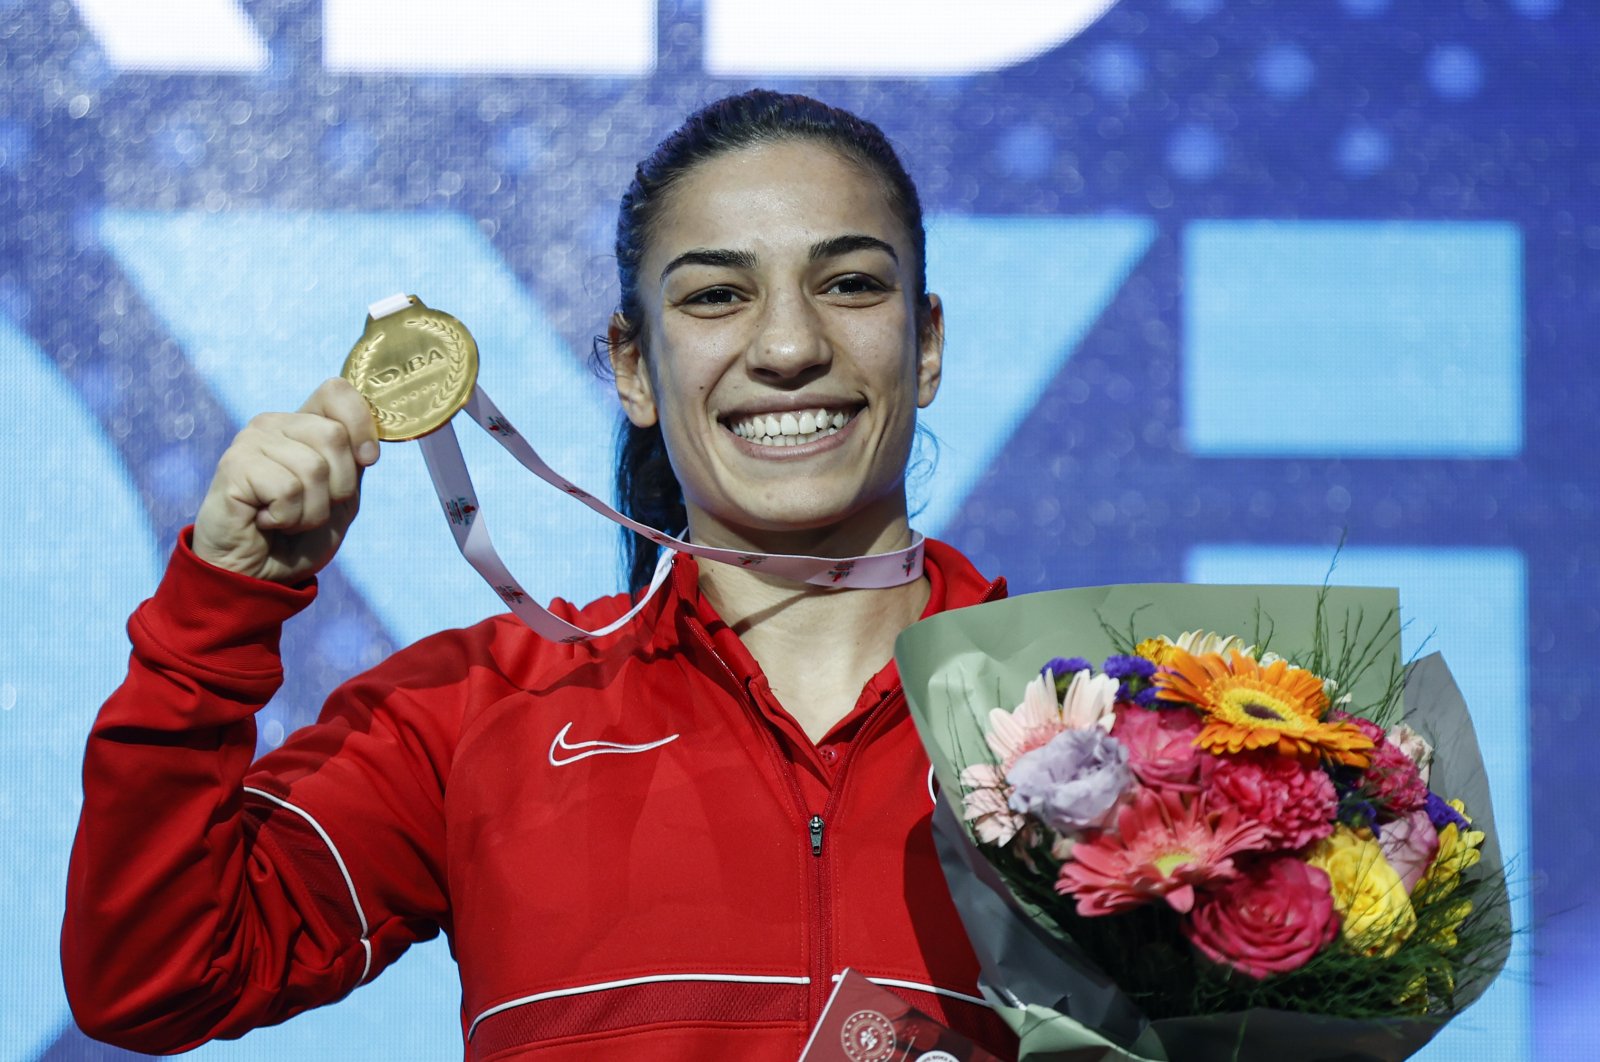 Ayşe Çağırır holds her gold medal after winning the 48 kg. category of the World Women&#039;s Boxing Championship hosted by the International Boxing Association (IBA), in Istanbul, Turkey, May 19, 2022. (AA Photo)